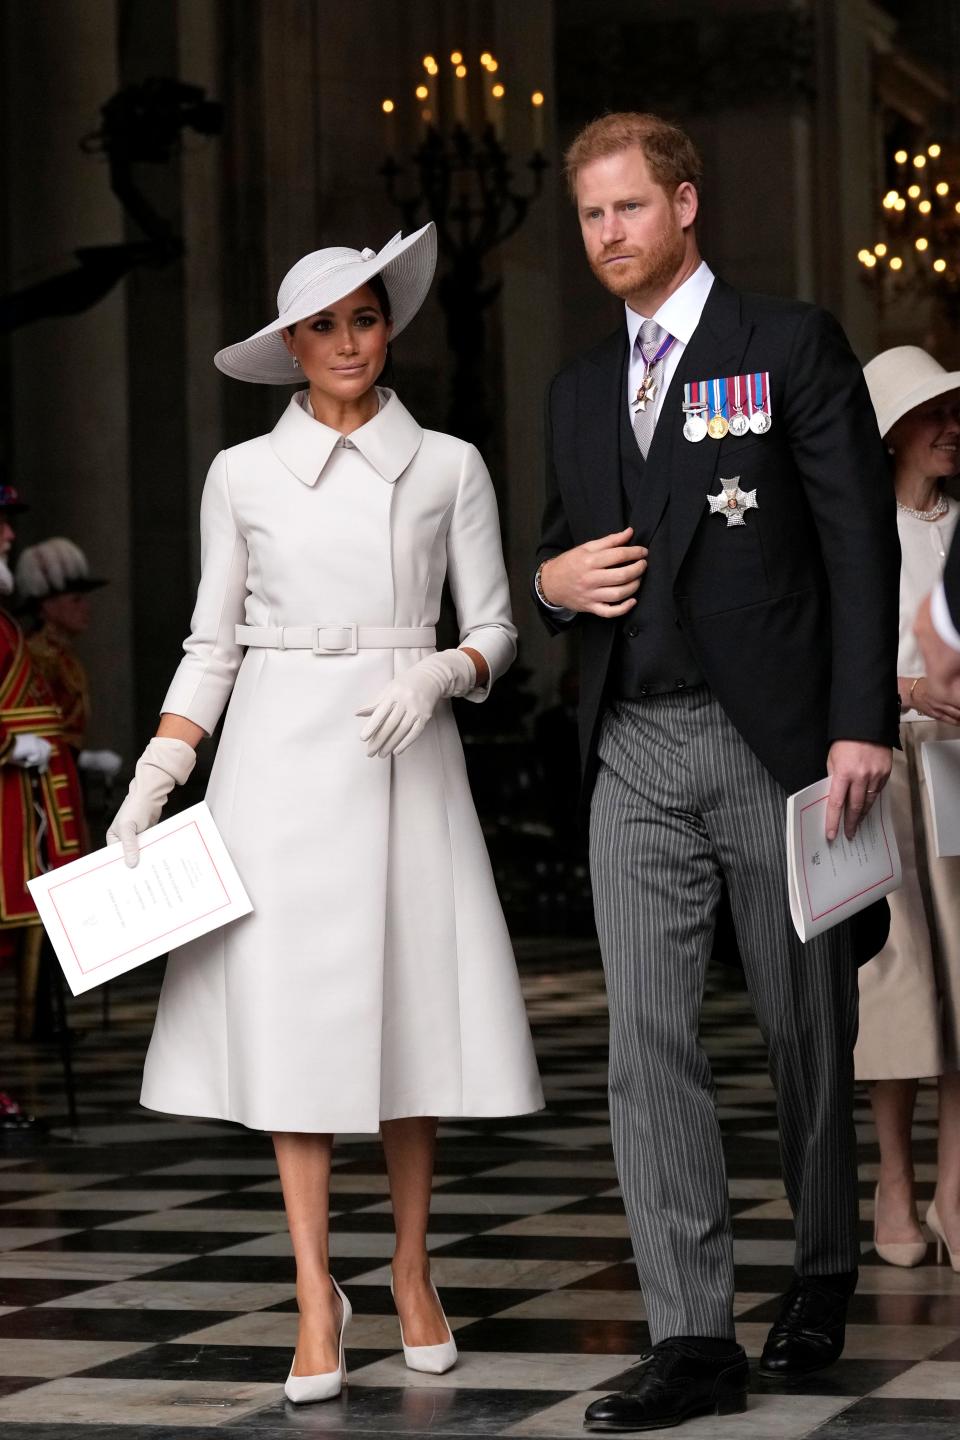 Prince Harry and Duchess Meghan of Sussex leave after a service at St Paul's Cathedral in London, on the second day of the Platinum Jubilee celebration of the 70-year reign of Queen Elizabeth II.